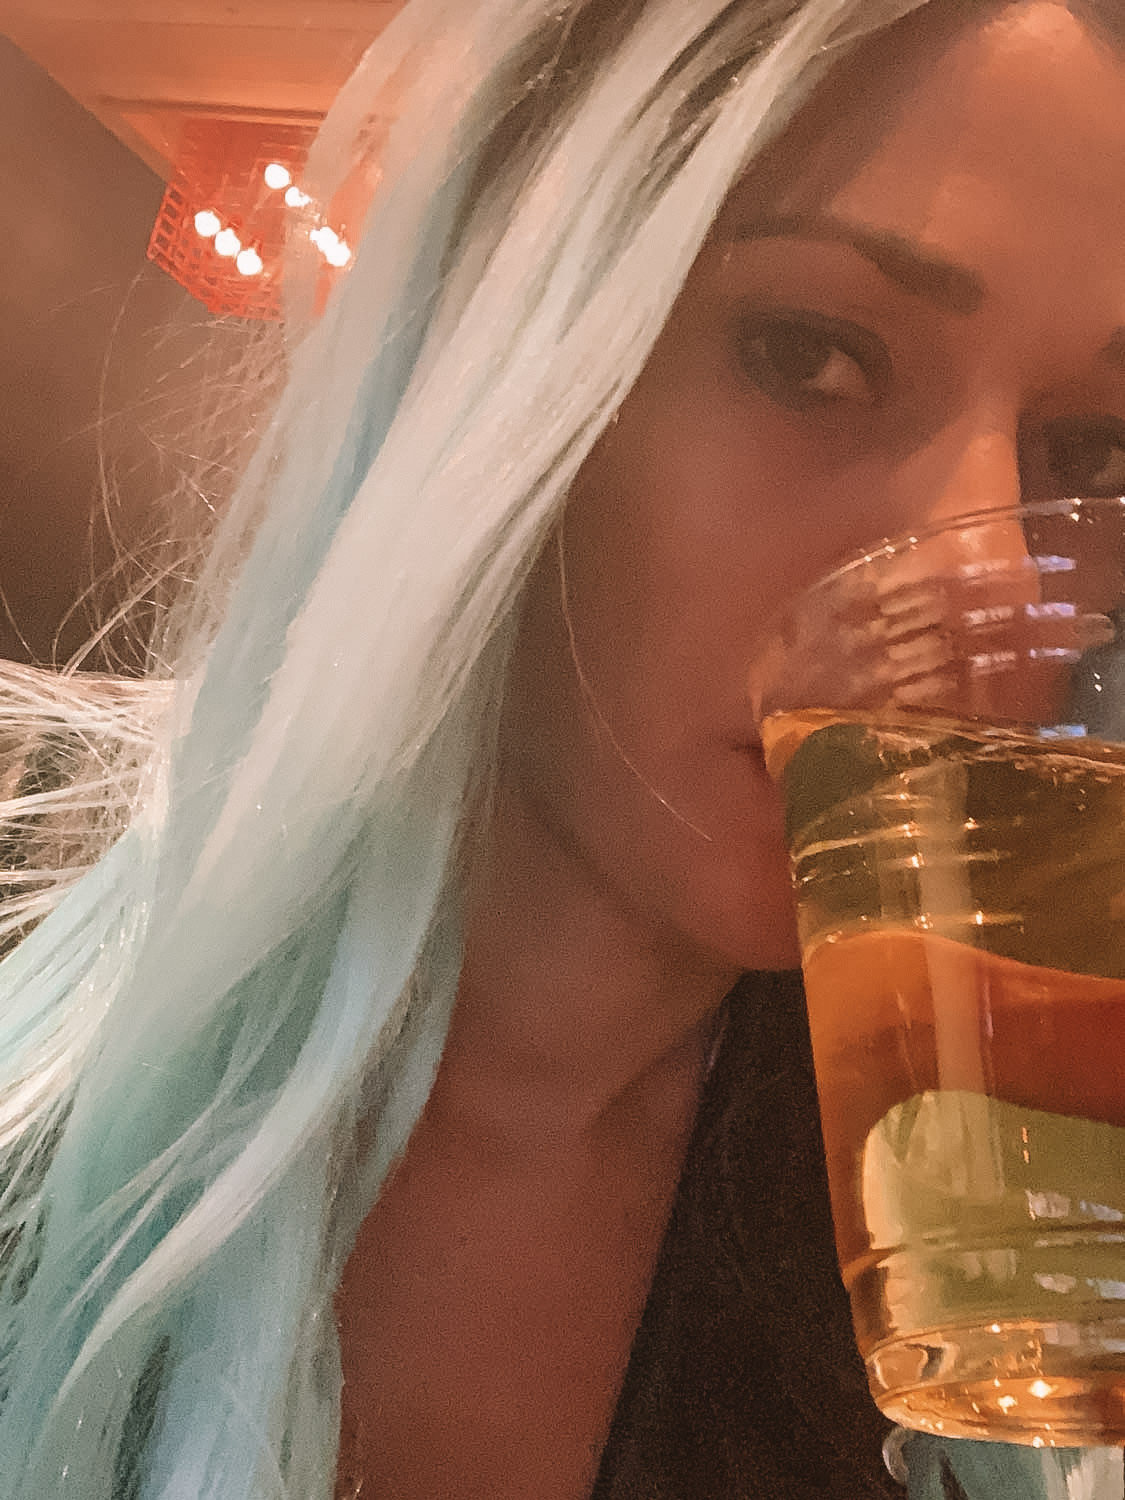 With a devastated look on her face, Elyse drinks a beer with a blue wig on.